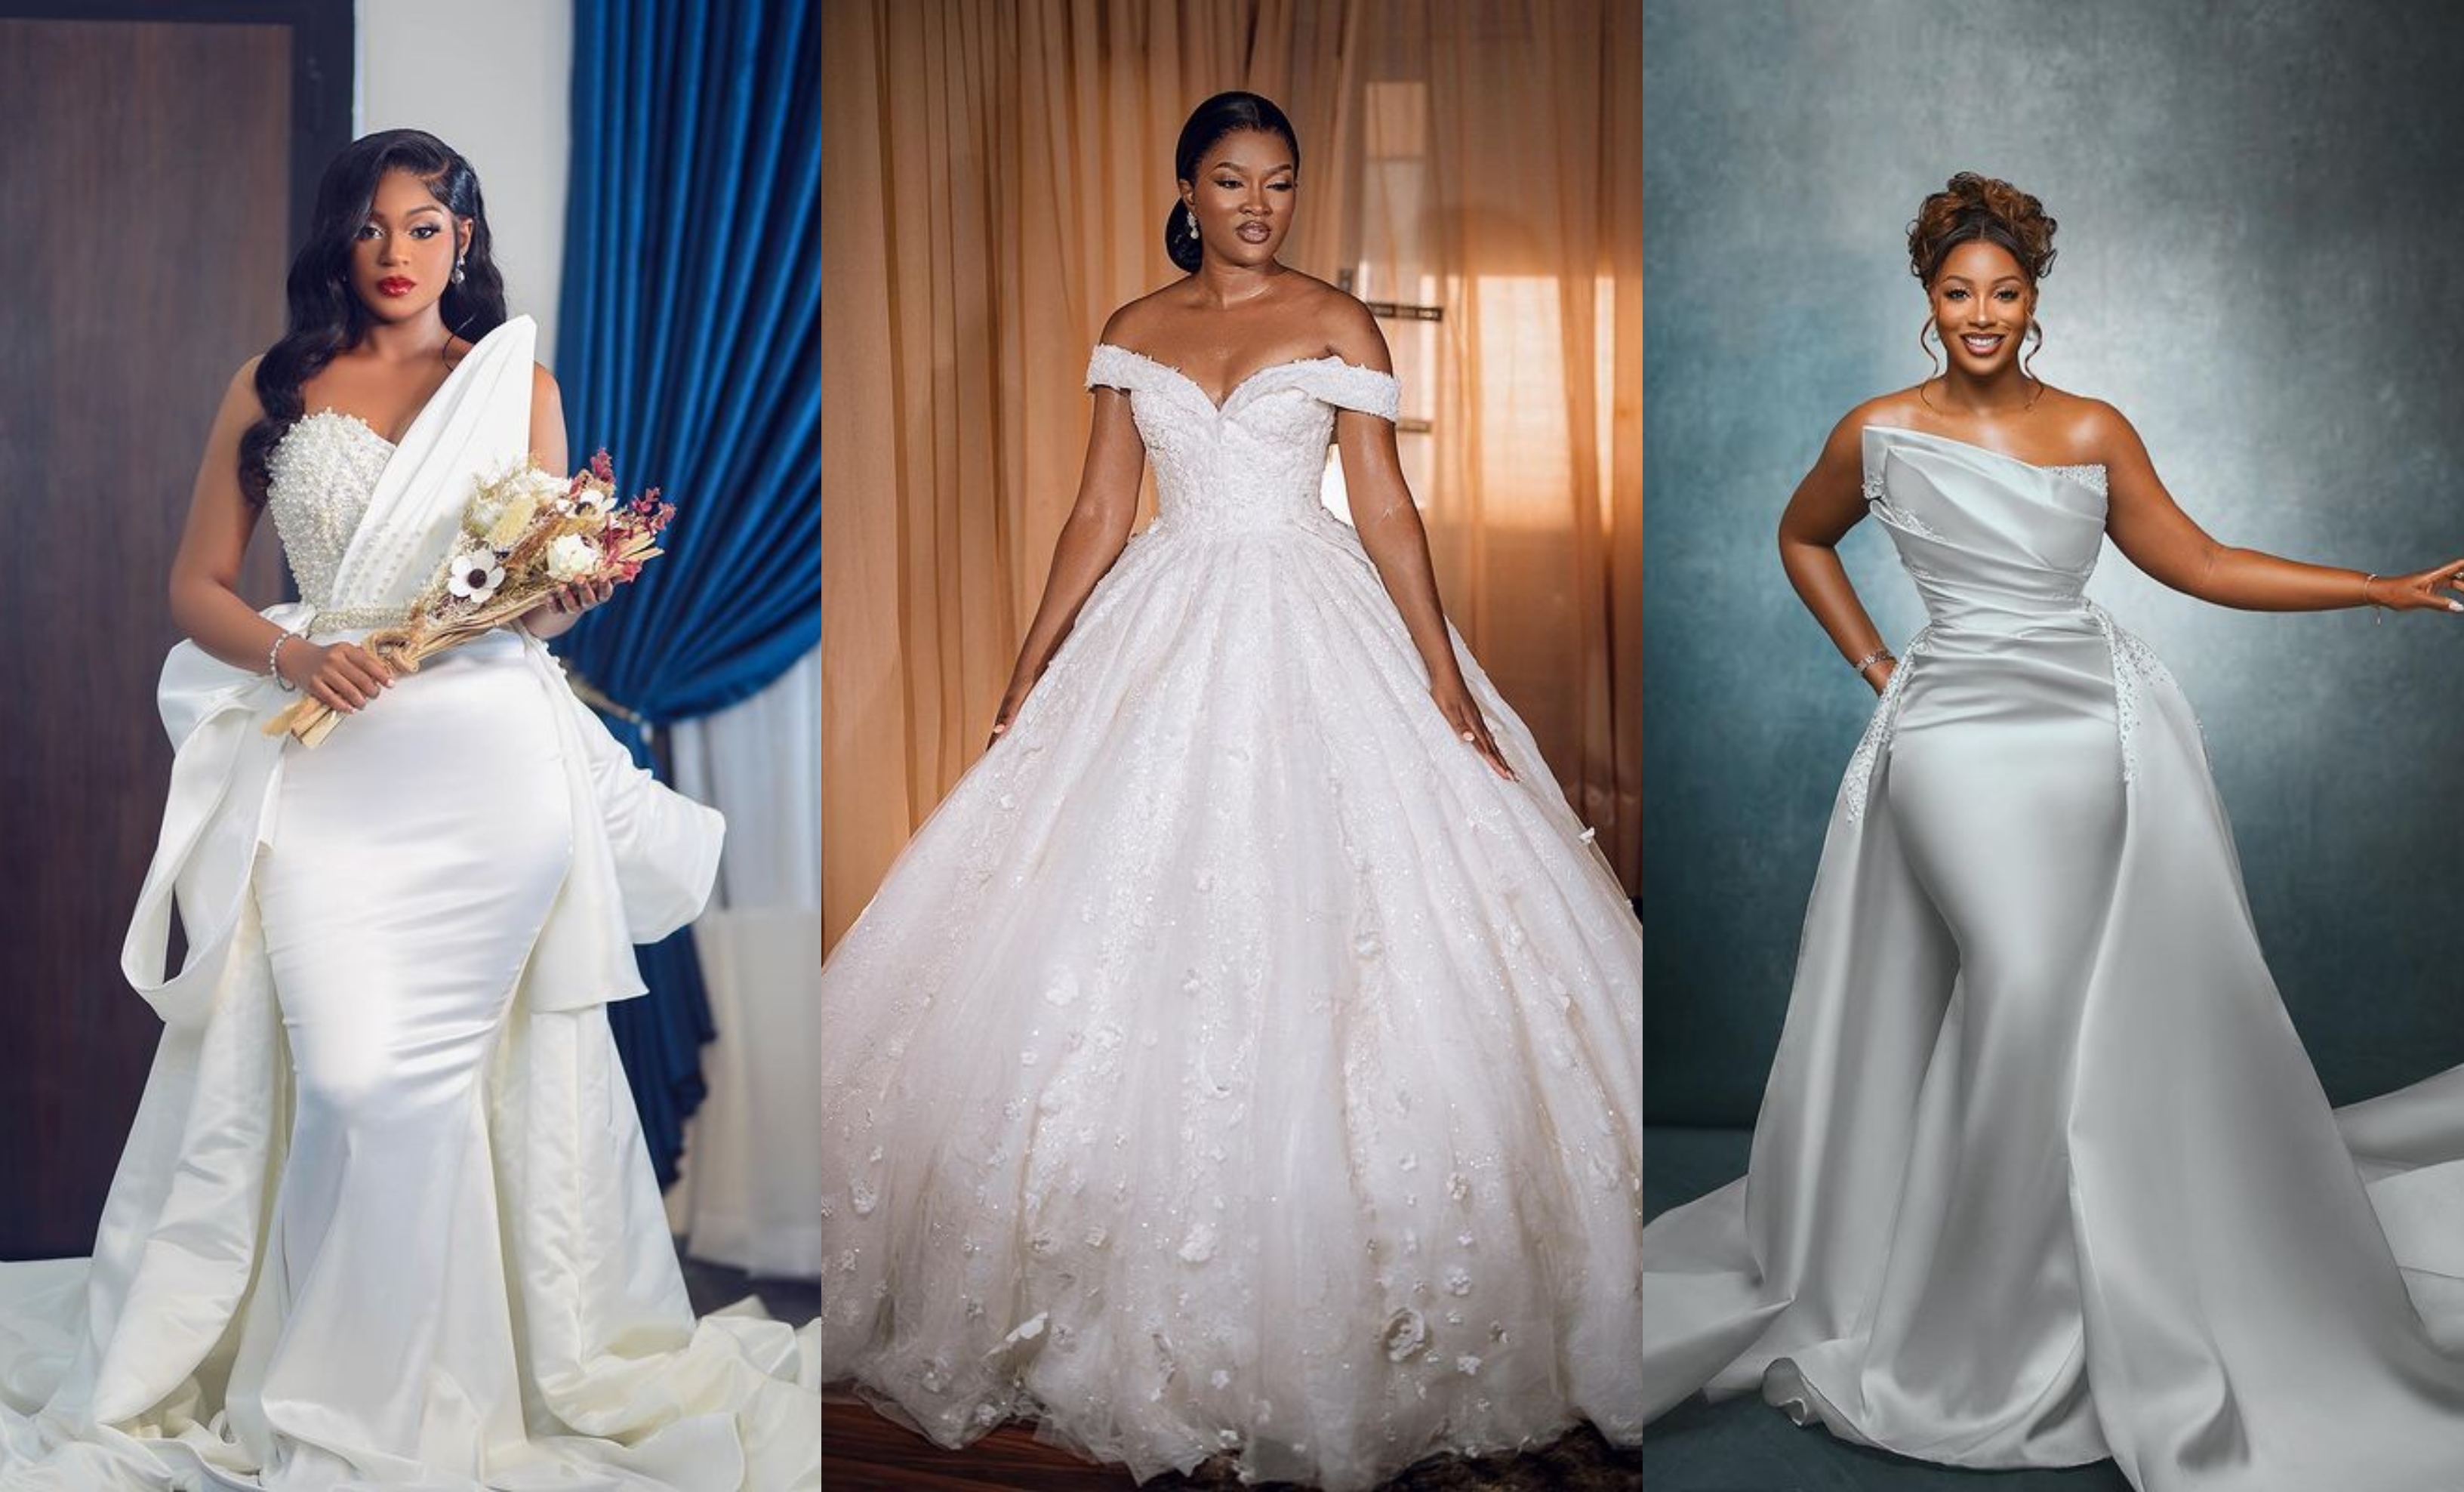 Wedding Gowns 101: Learn the Silhouettes | Wedding Dress Styles |  BridalGuide